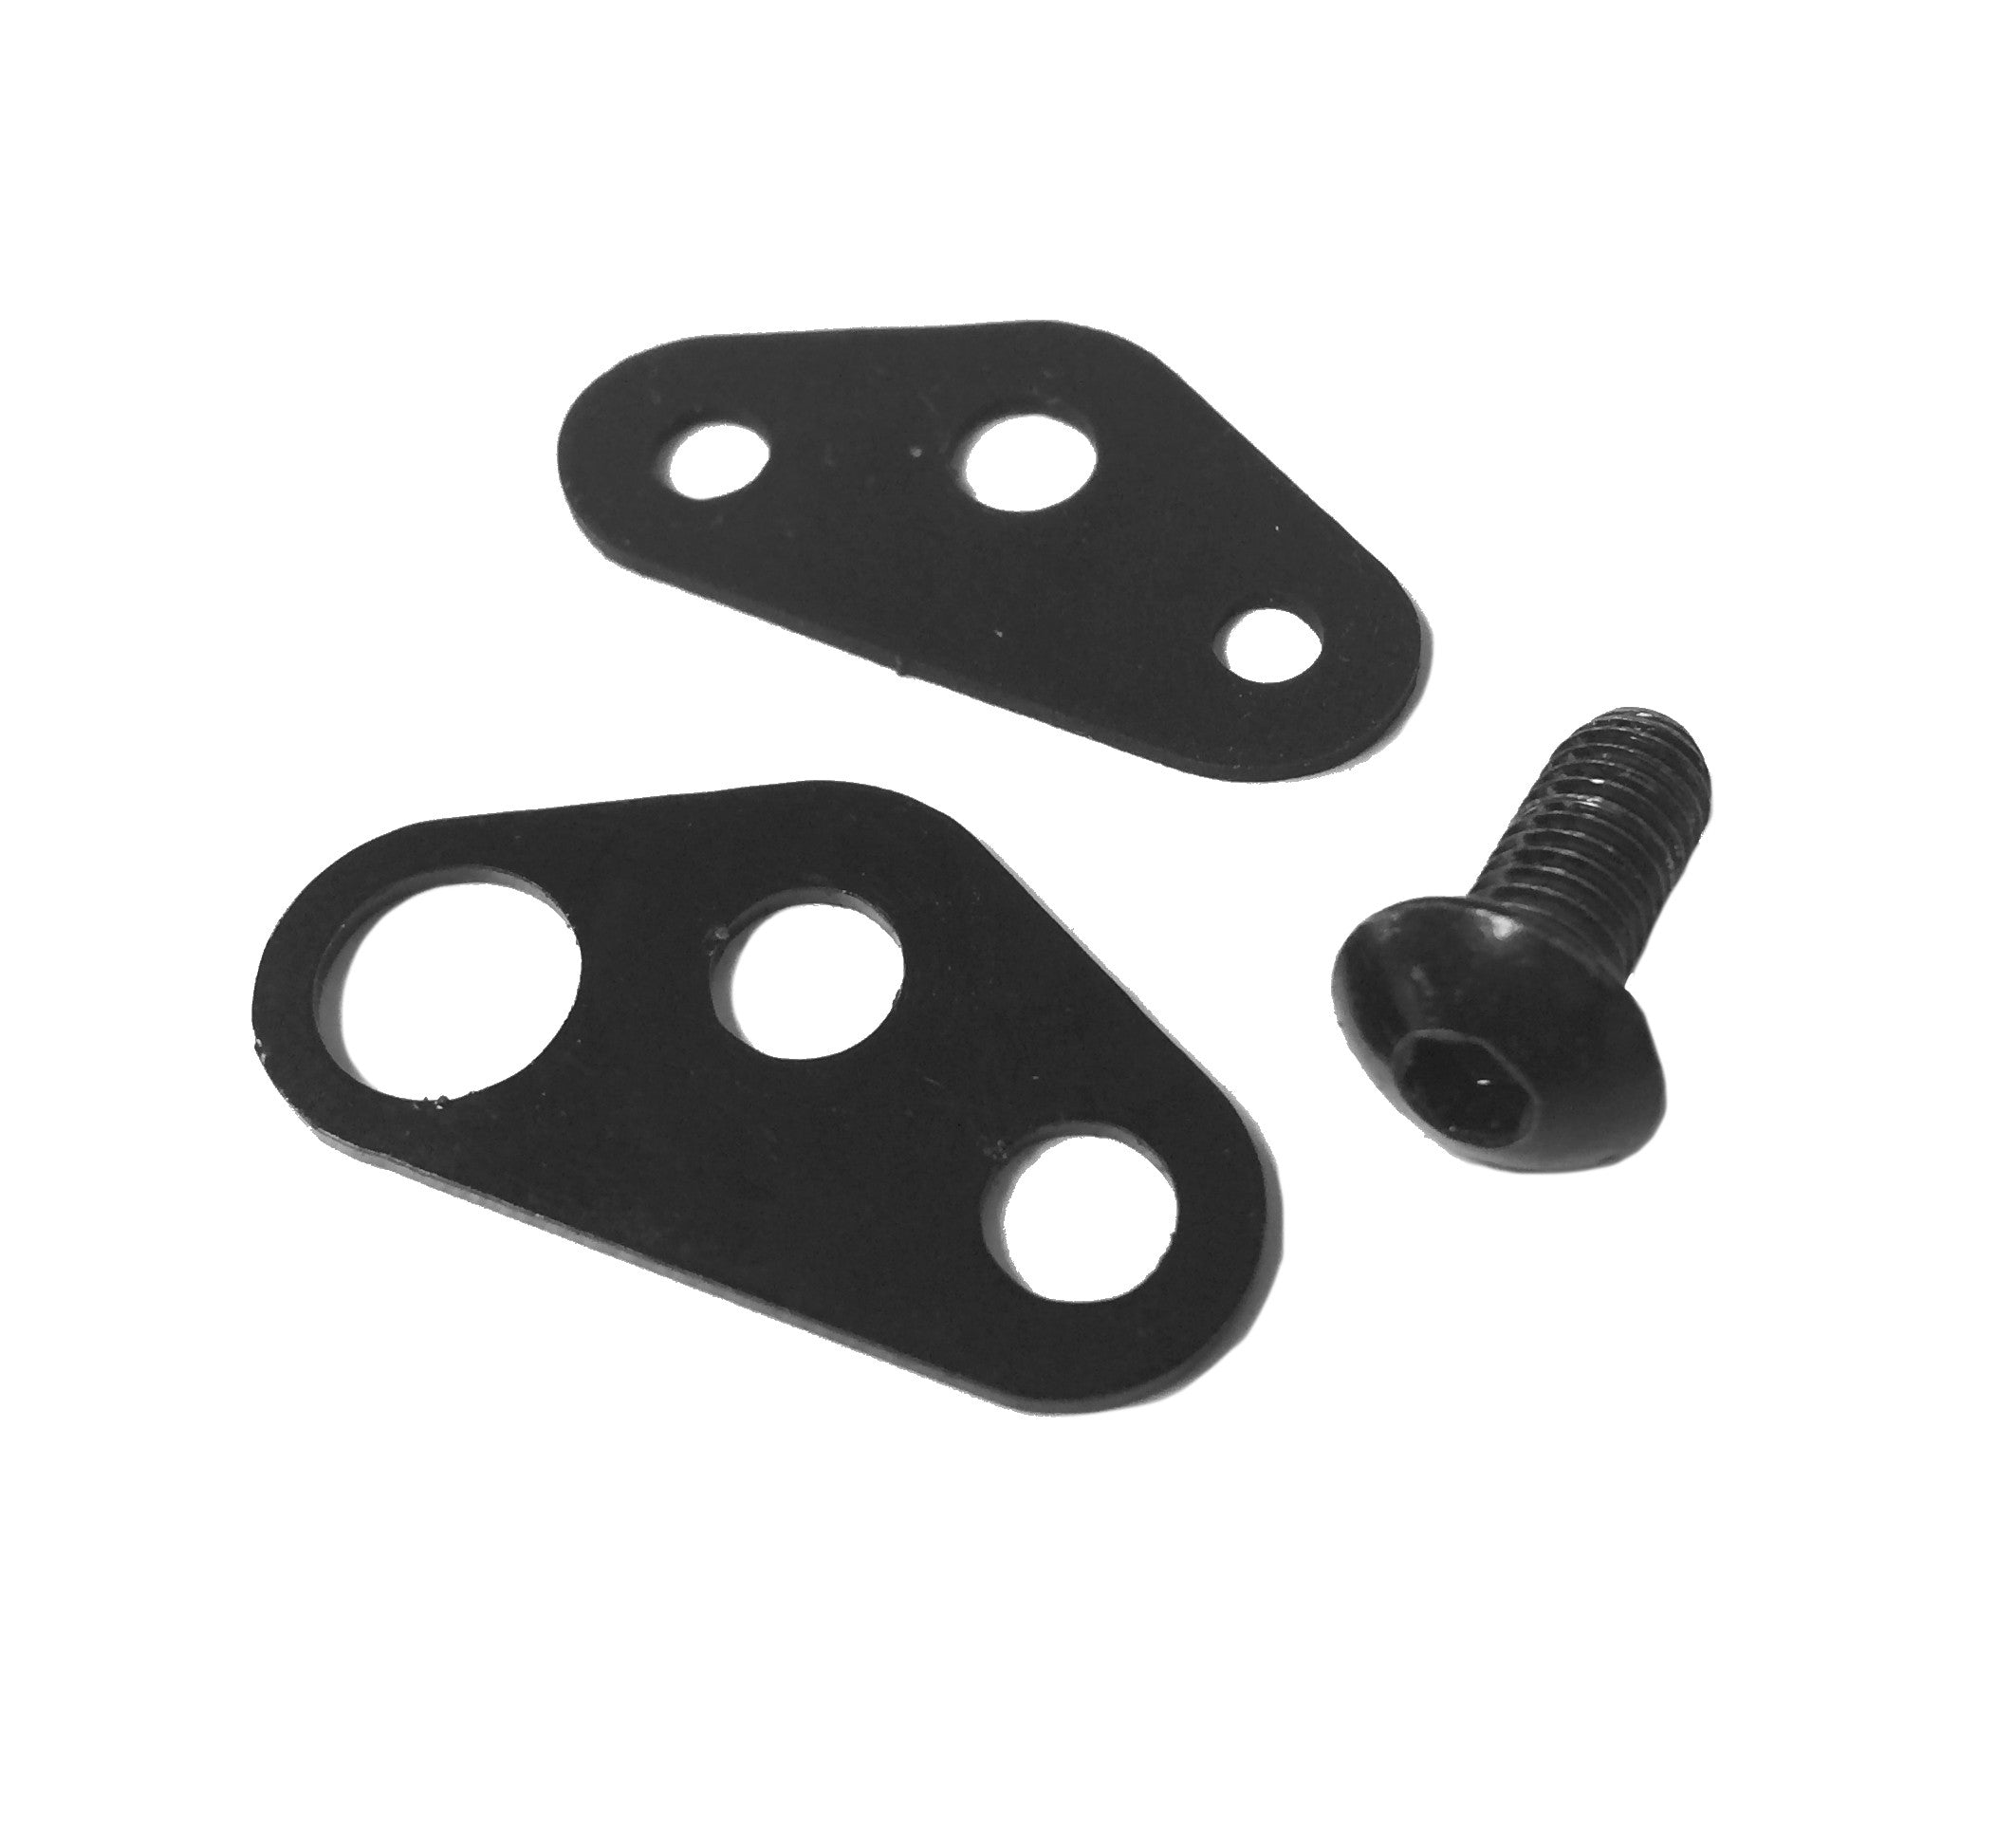 Warden Carbon Rear Cable Port Plate and Rubber Gasket